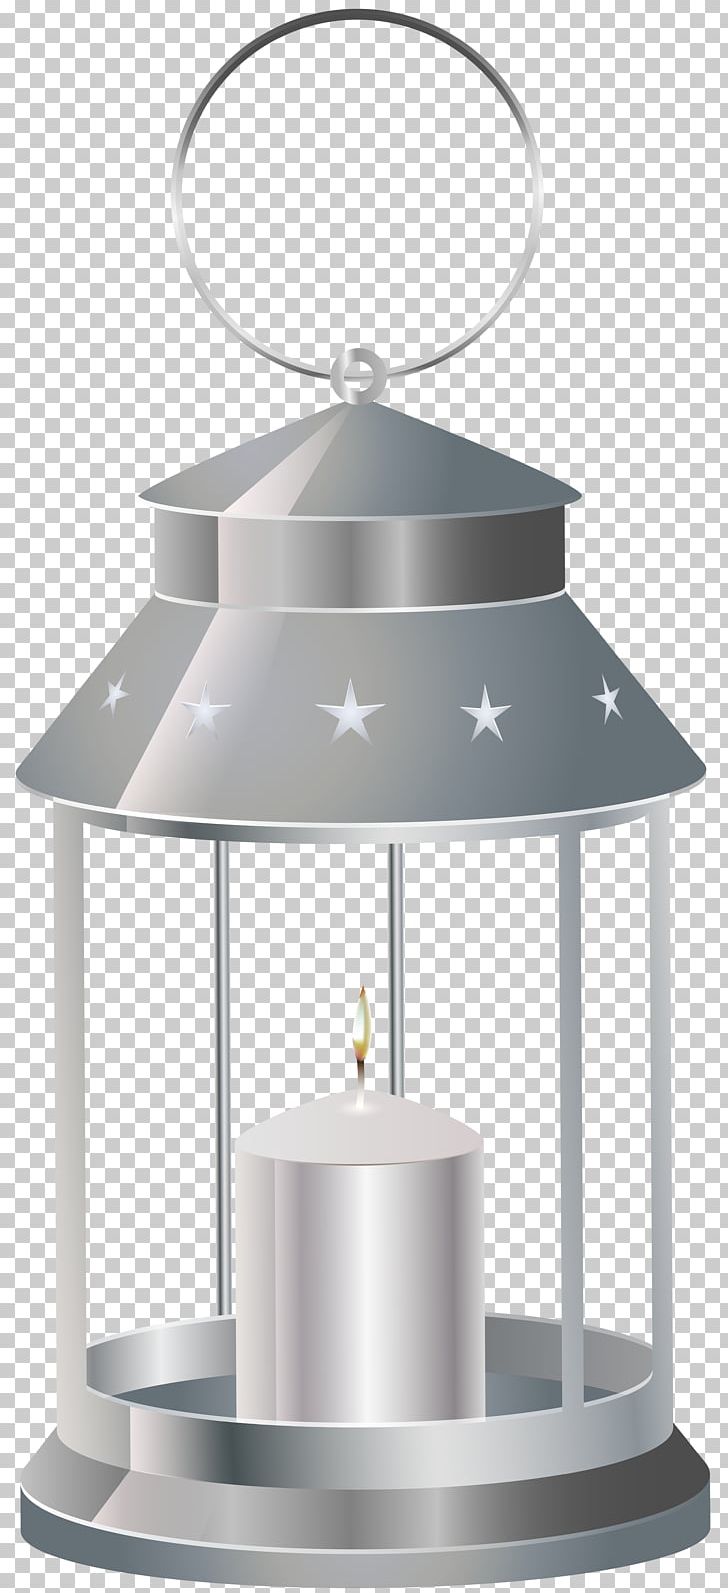 Lantern Candle PNG, Clipart, Animation, Blog, Candle, Candlestick, Clipart Free PNG Download